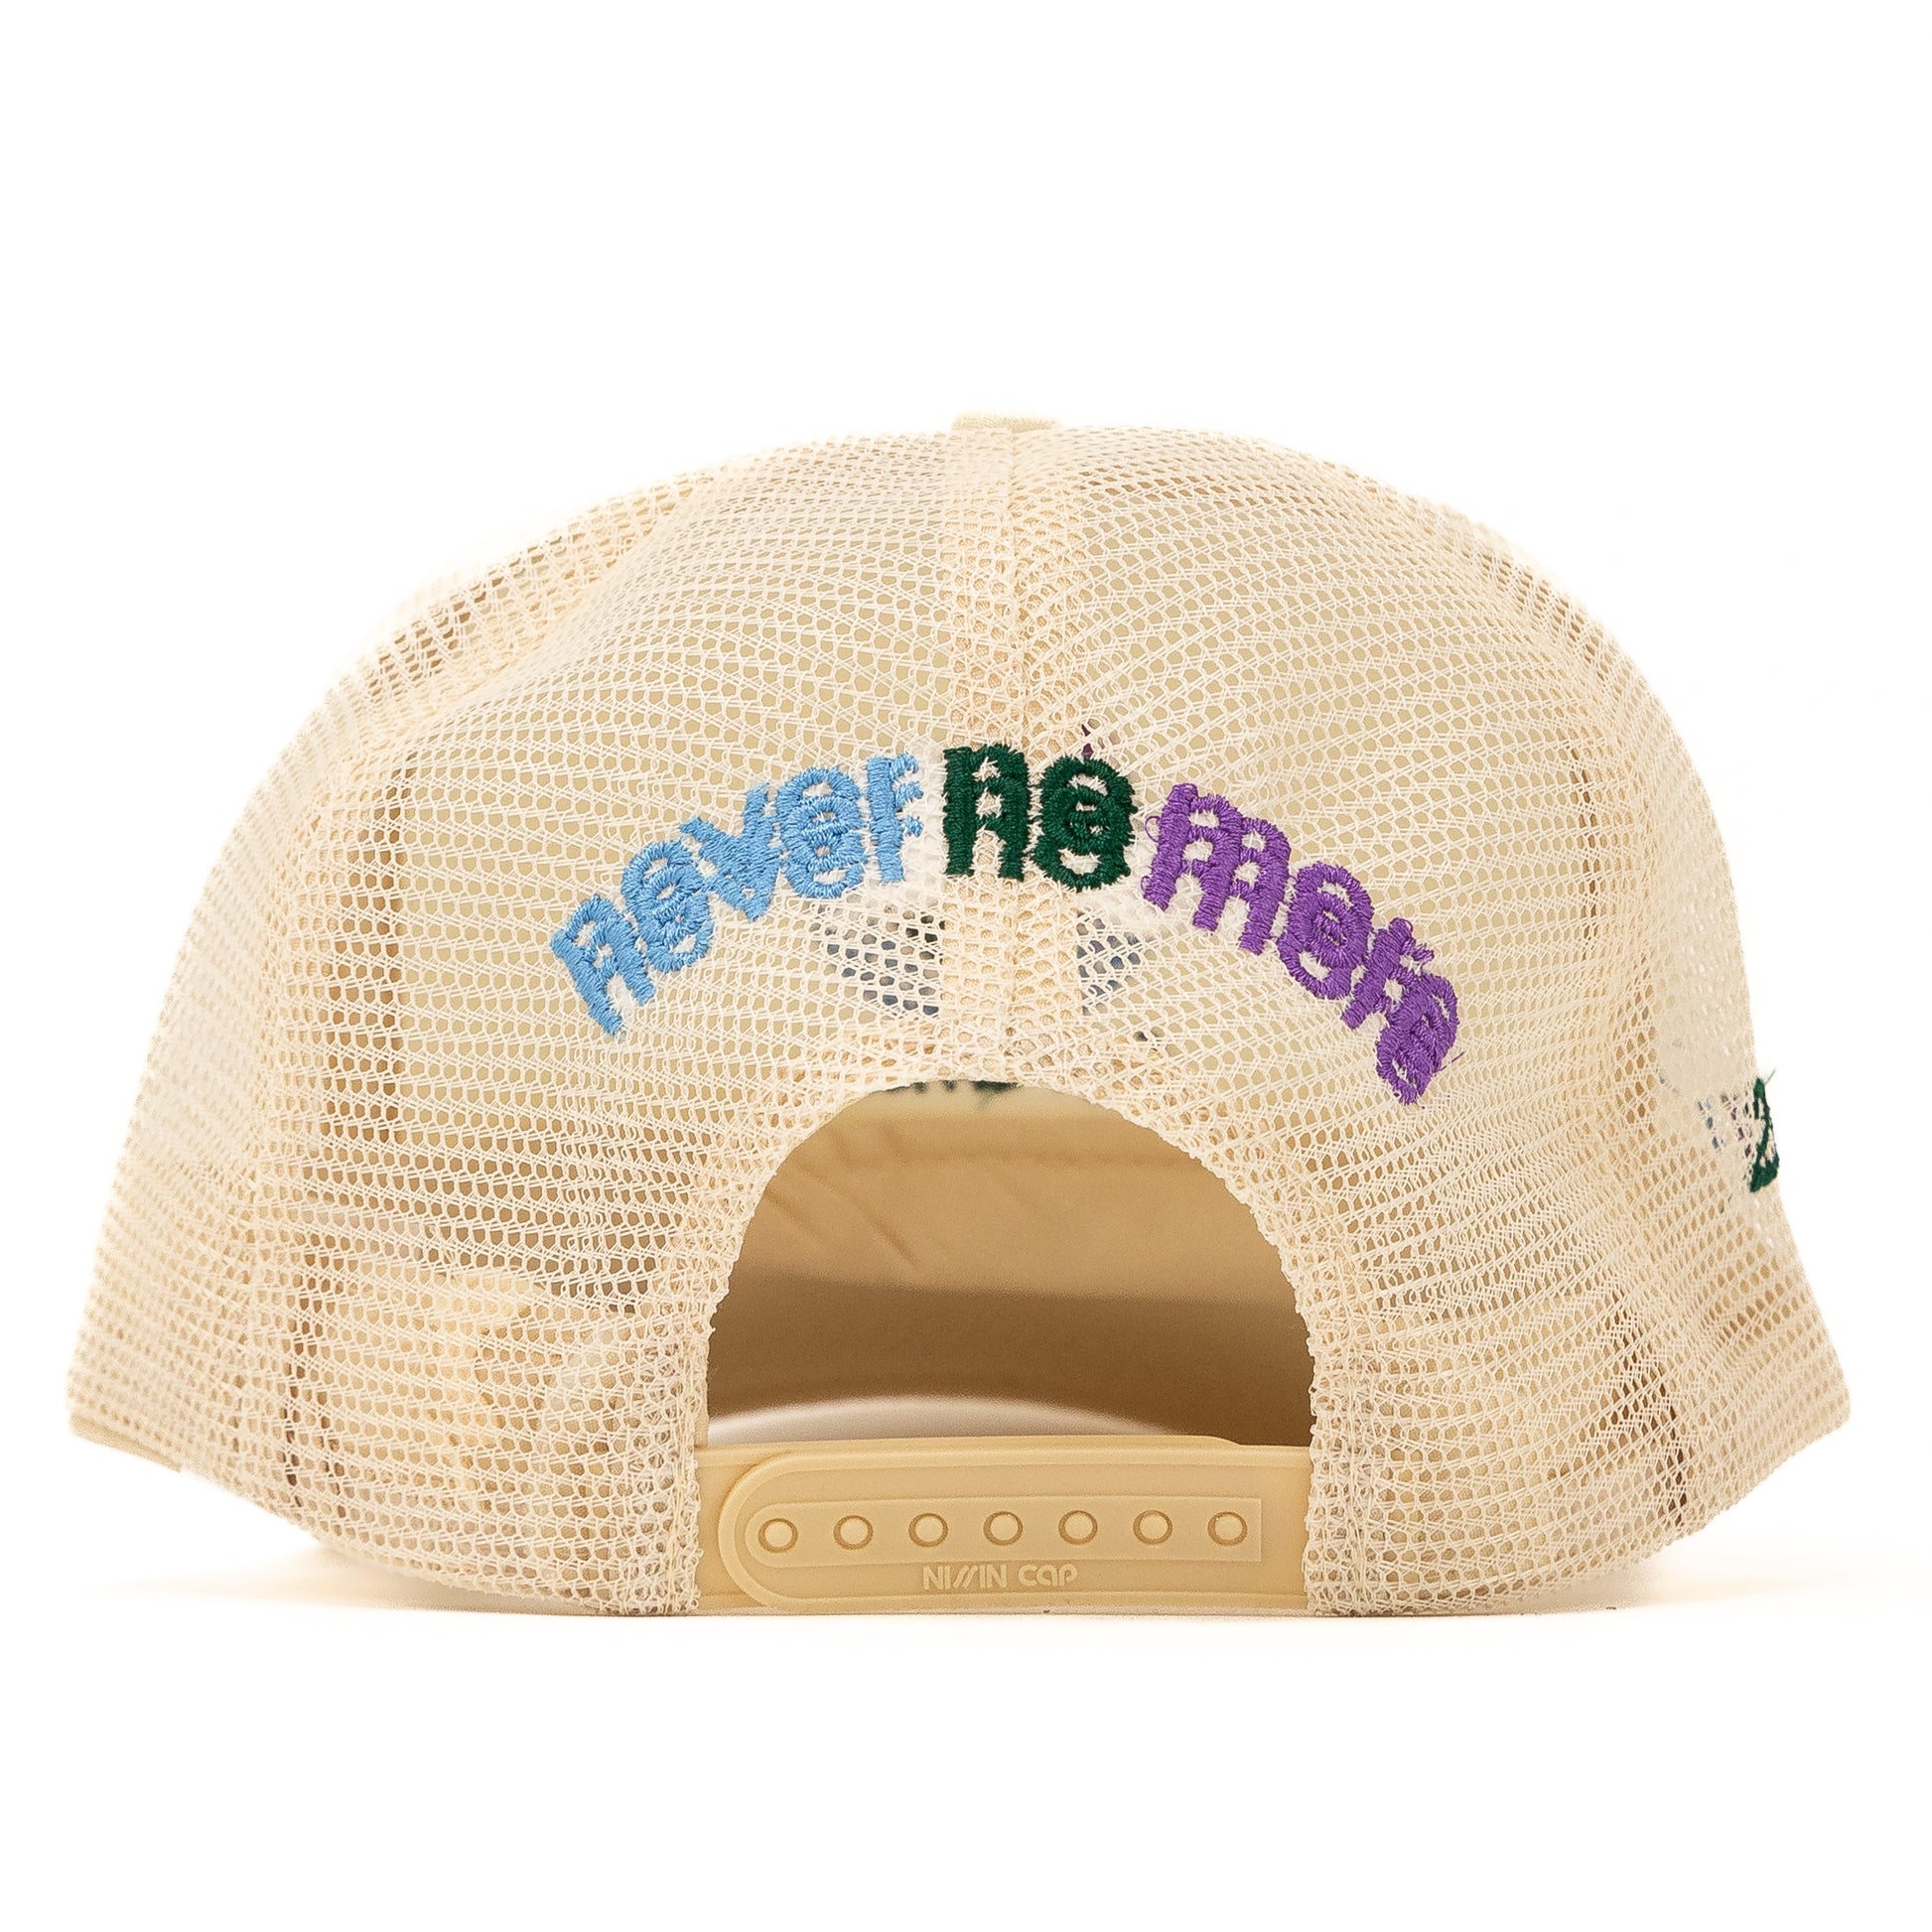 Global Duck Trucker Hat, Ivory - Layr Official